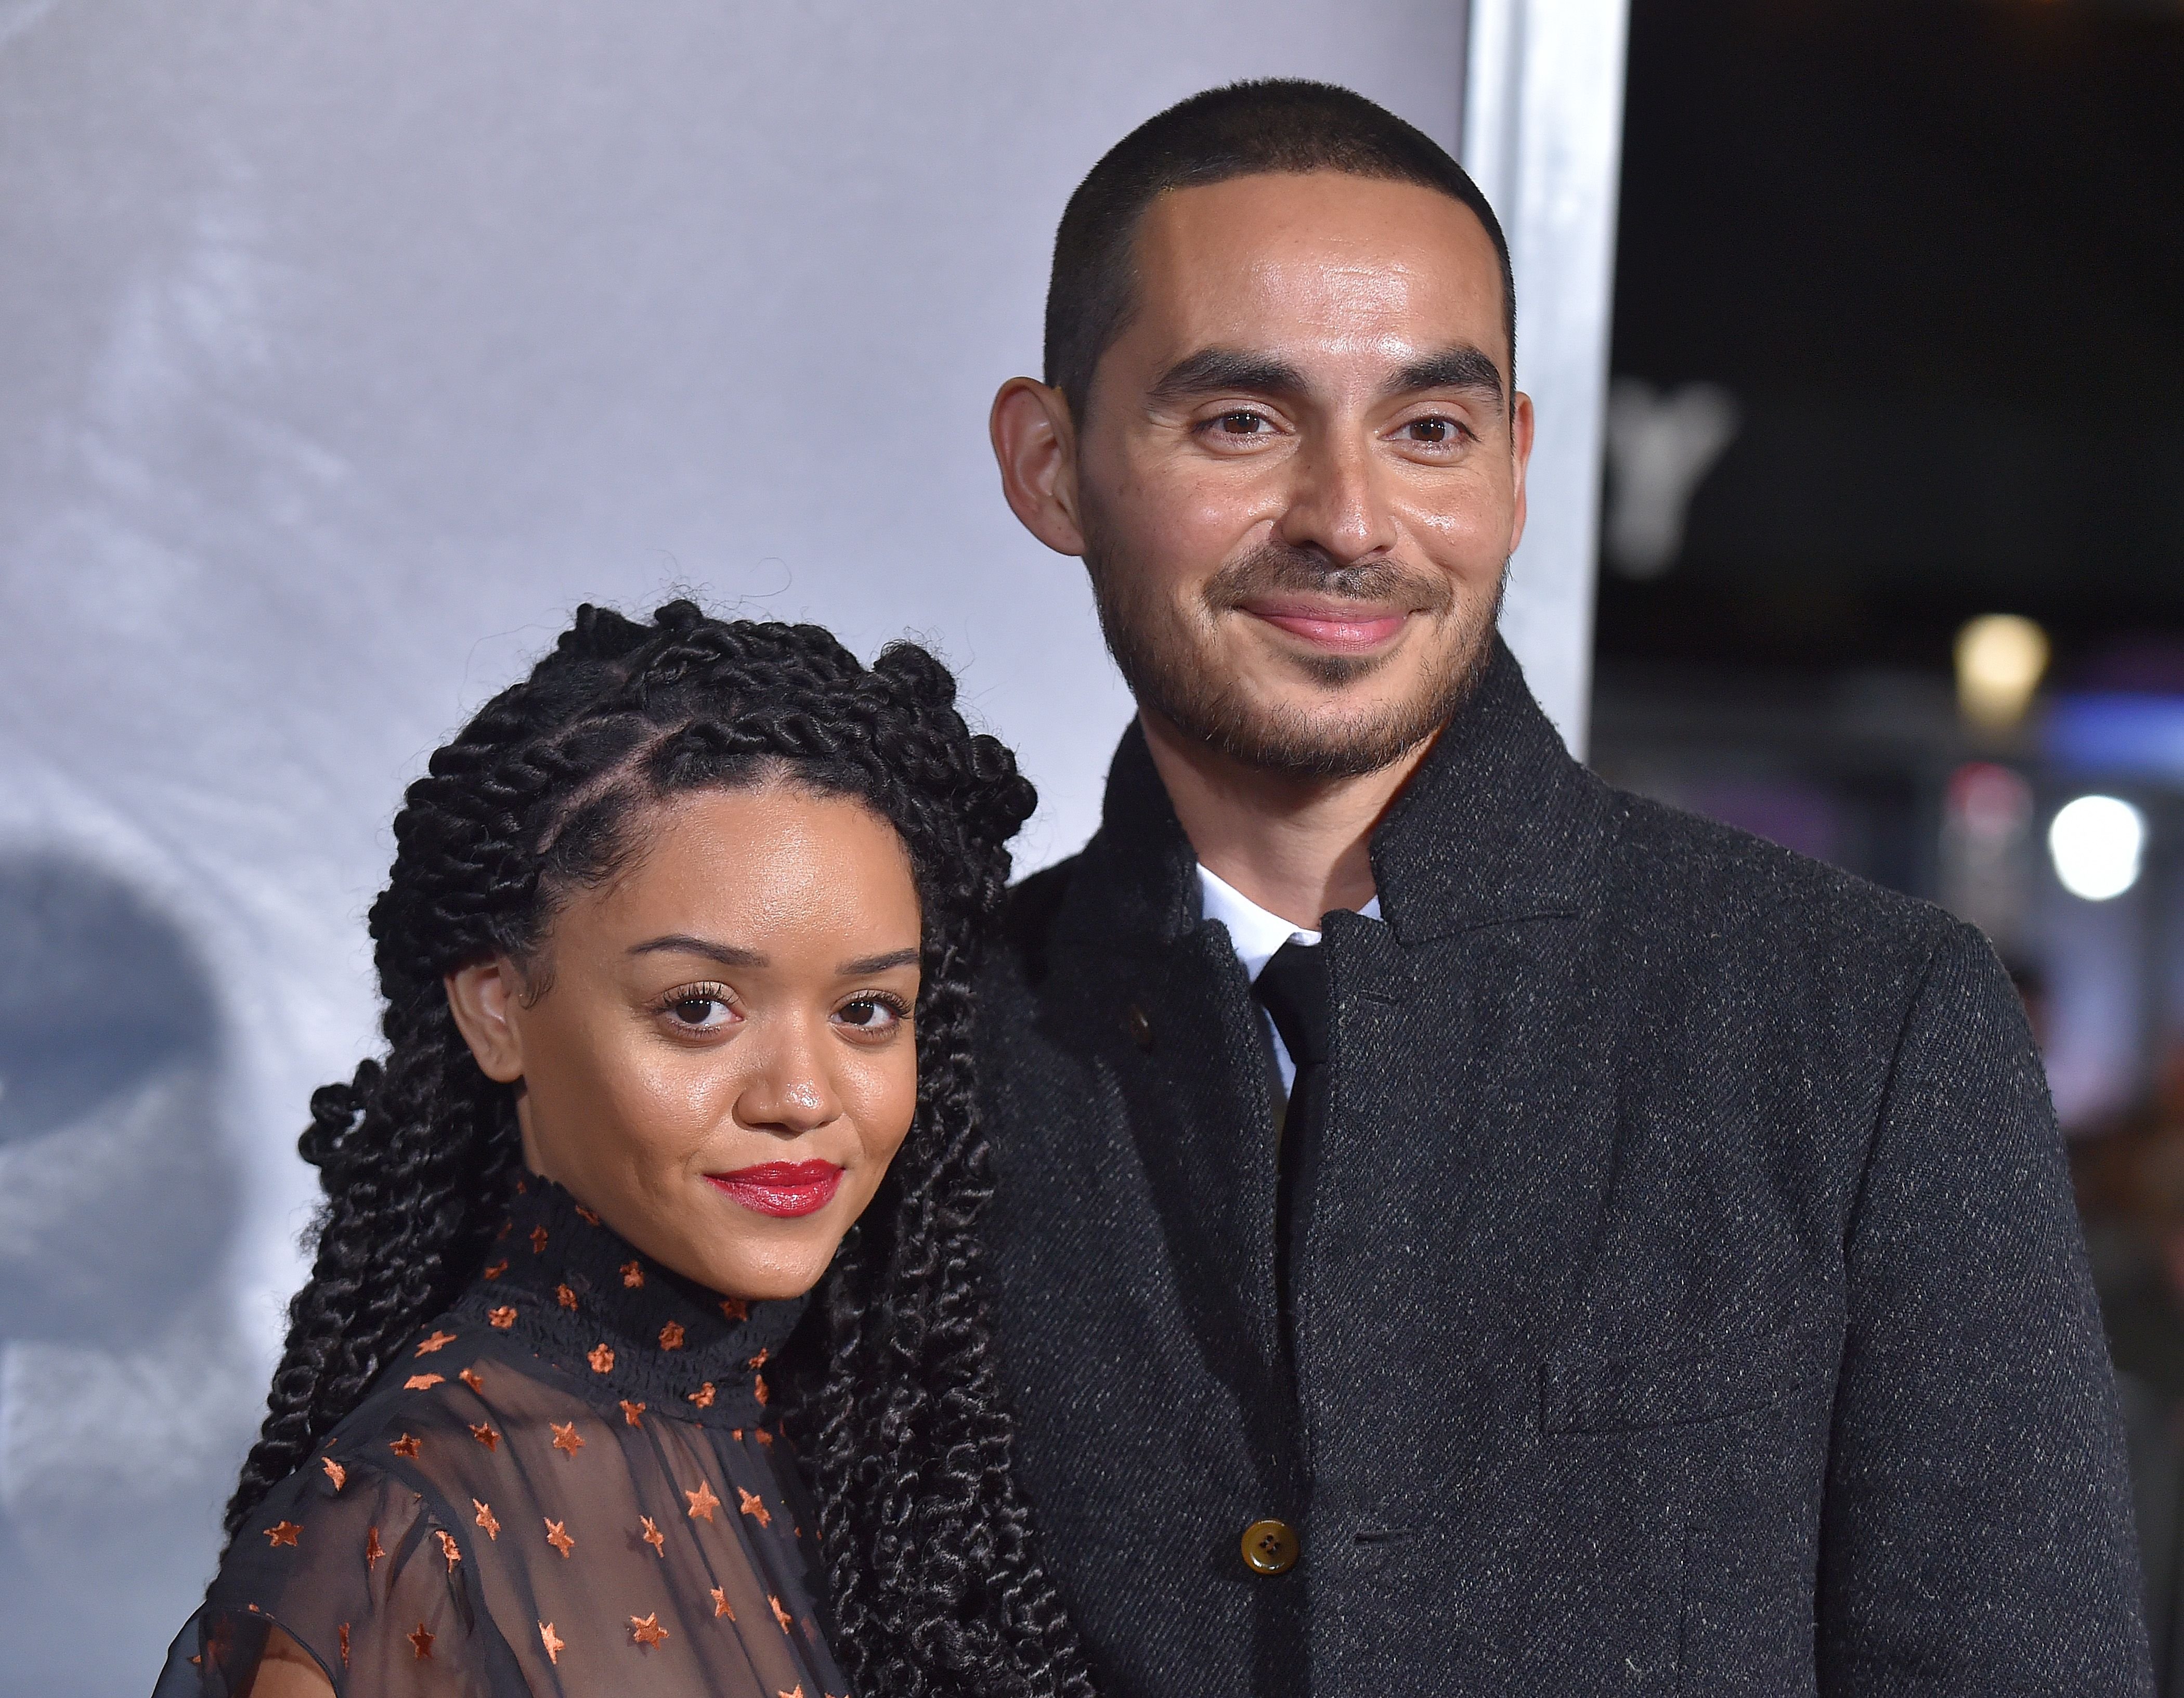 Manny Montana and Adelfa Marr in Westwood, California on December 10, 2018 | Source: Getty Images 